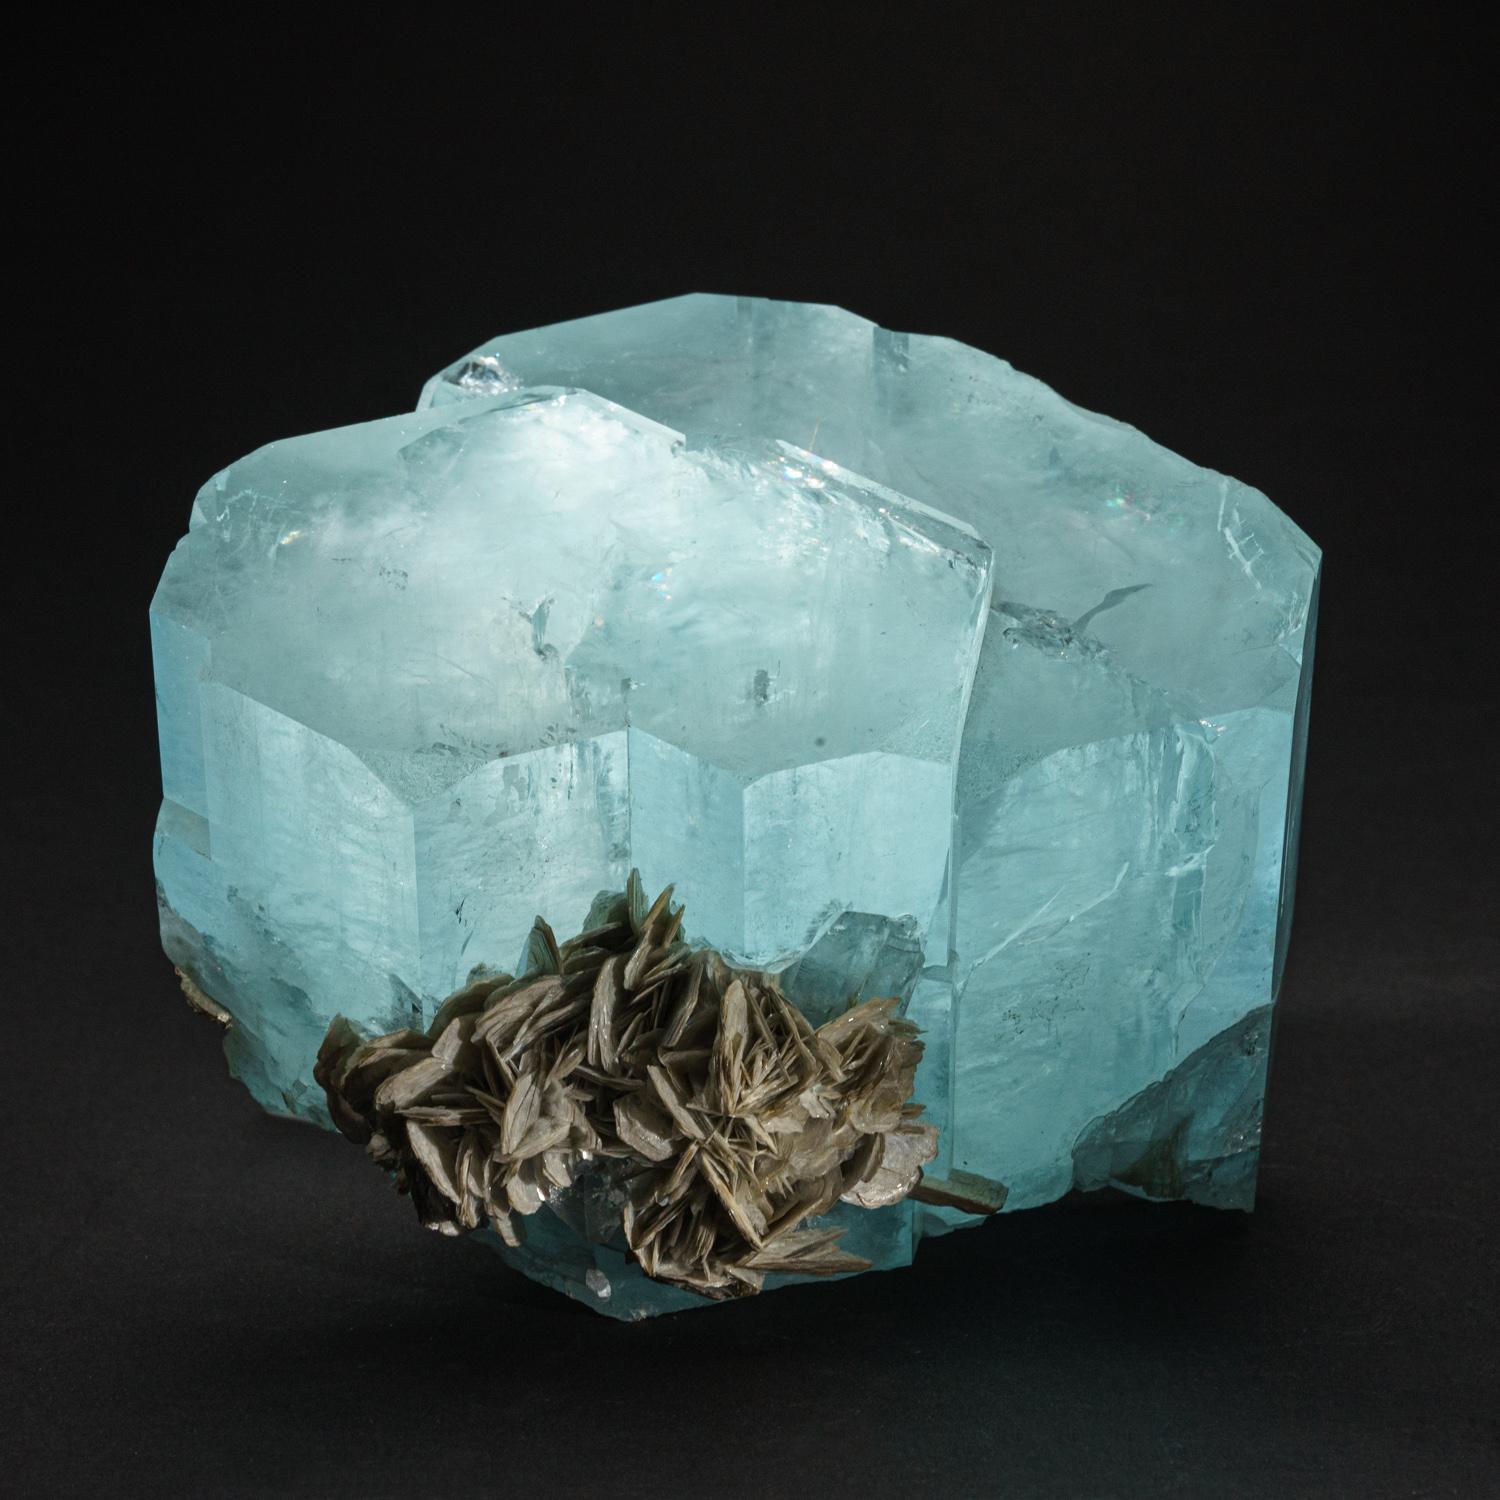 From Dusso, Gilgit District, Gilgit-Baltistan, Pakistan

Lustrous translucent to transparent beryl var. aquamarine crystals in a parallel growth formation. The smaller crystal along the side appears to have faces showing subparallel growth.

